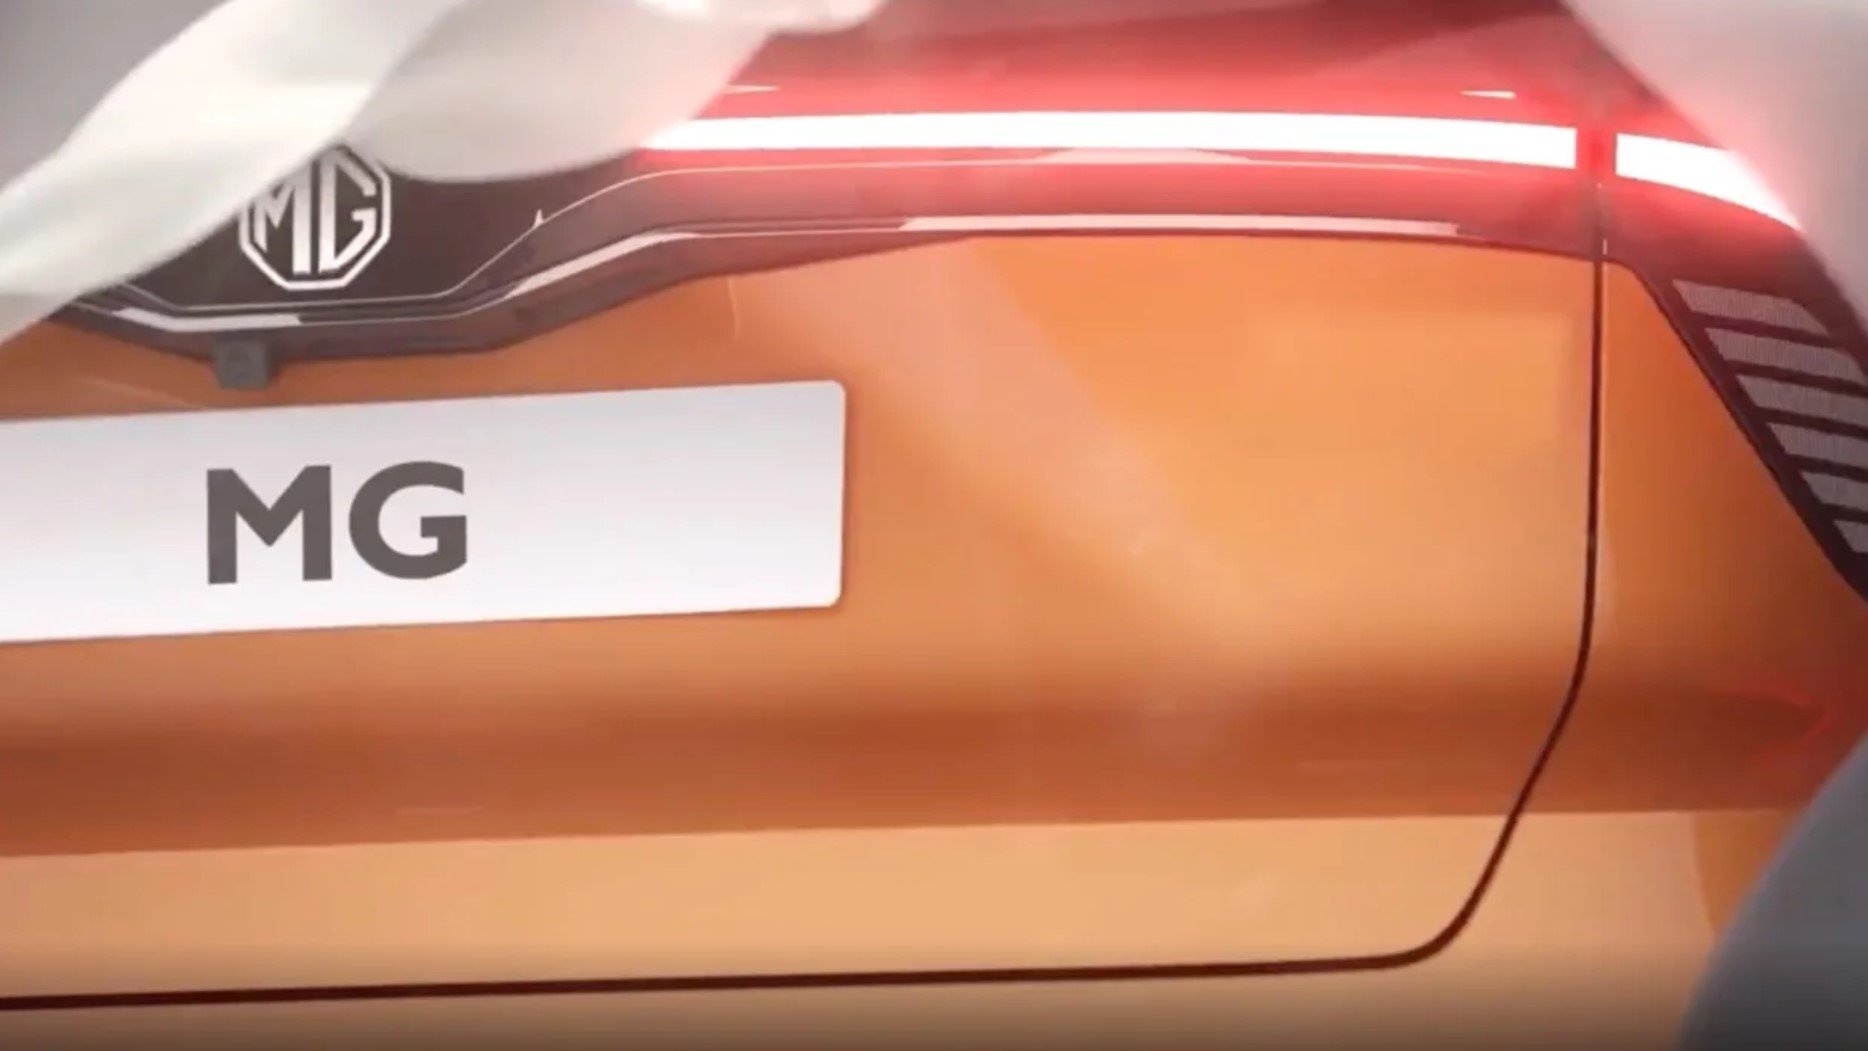 Mg Teases New Mg4 Electric Hatchback Will It Launch In India Techradar